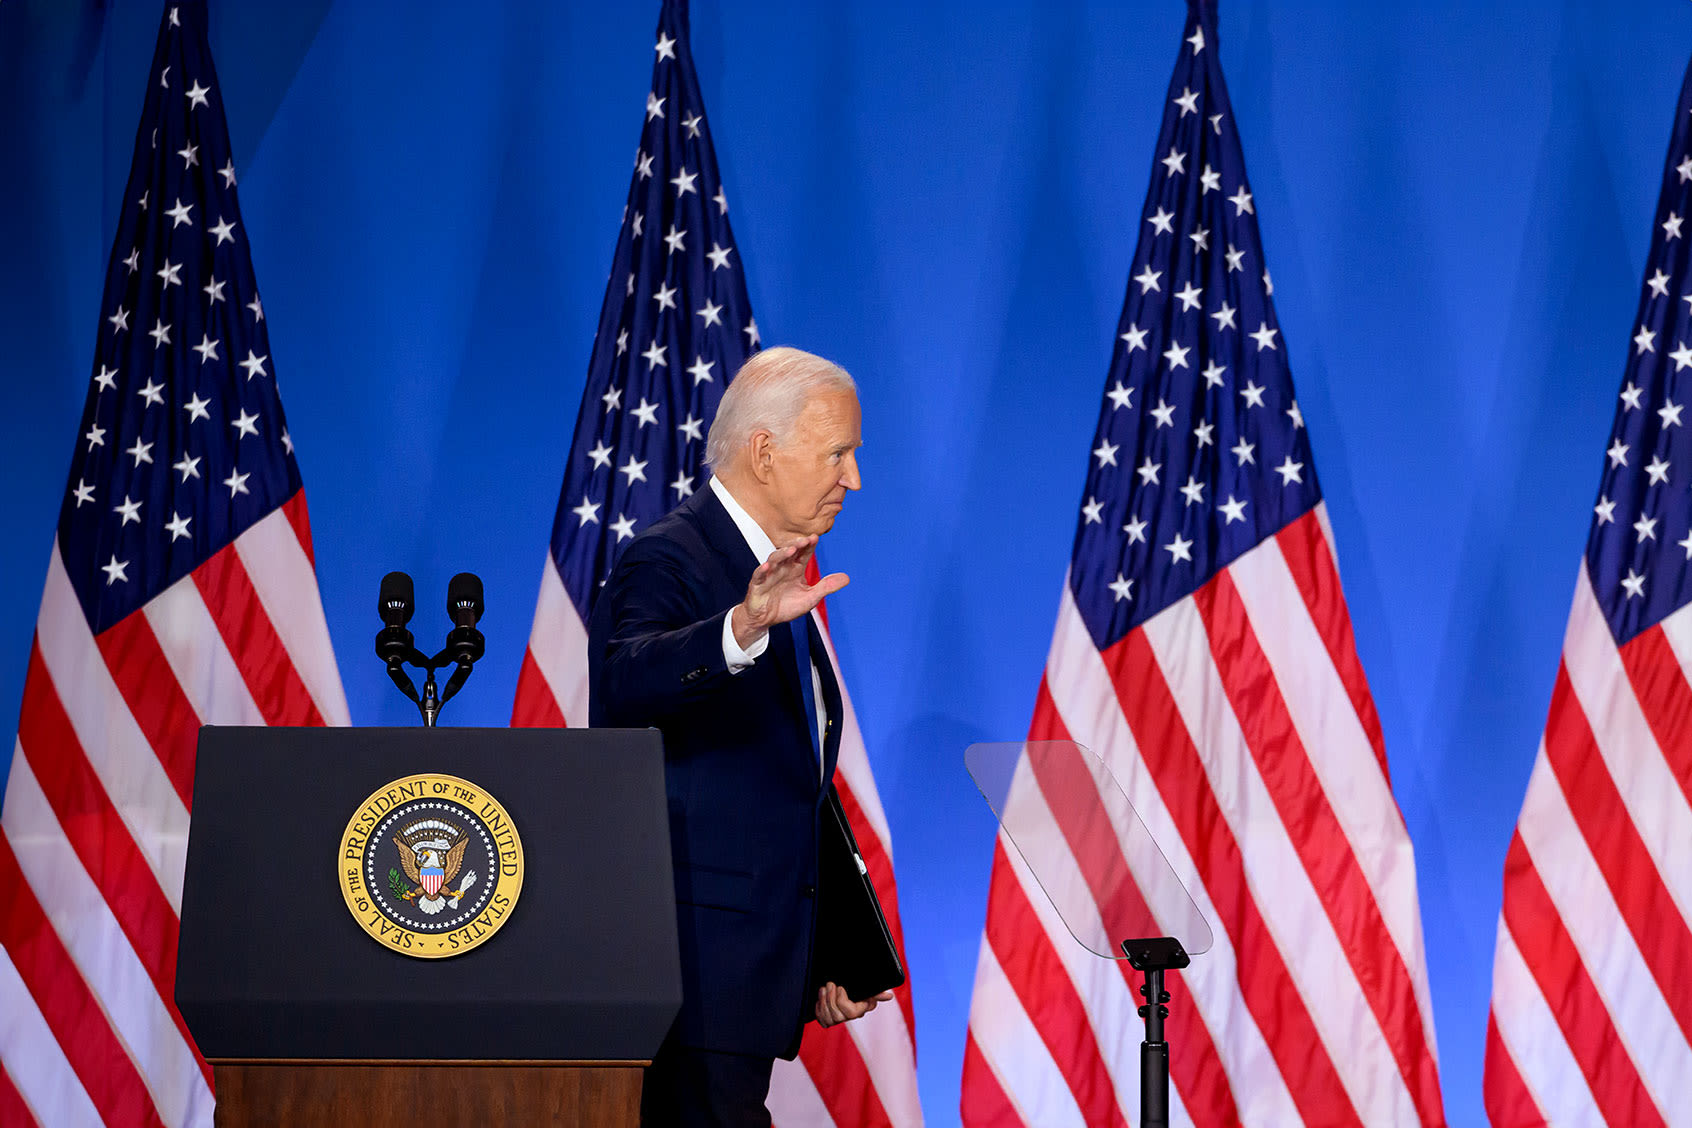 "This is over": Biden's Democratic critics say press conference not enough to stop growing revolt